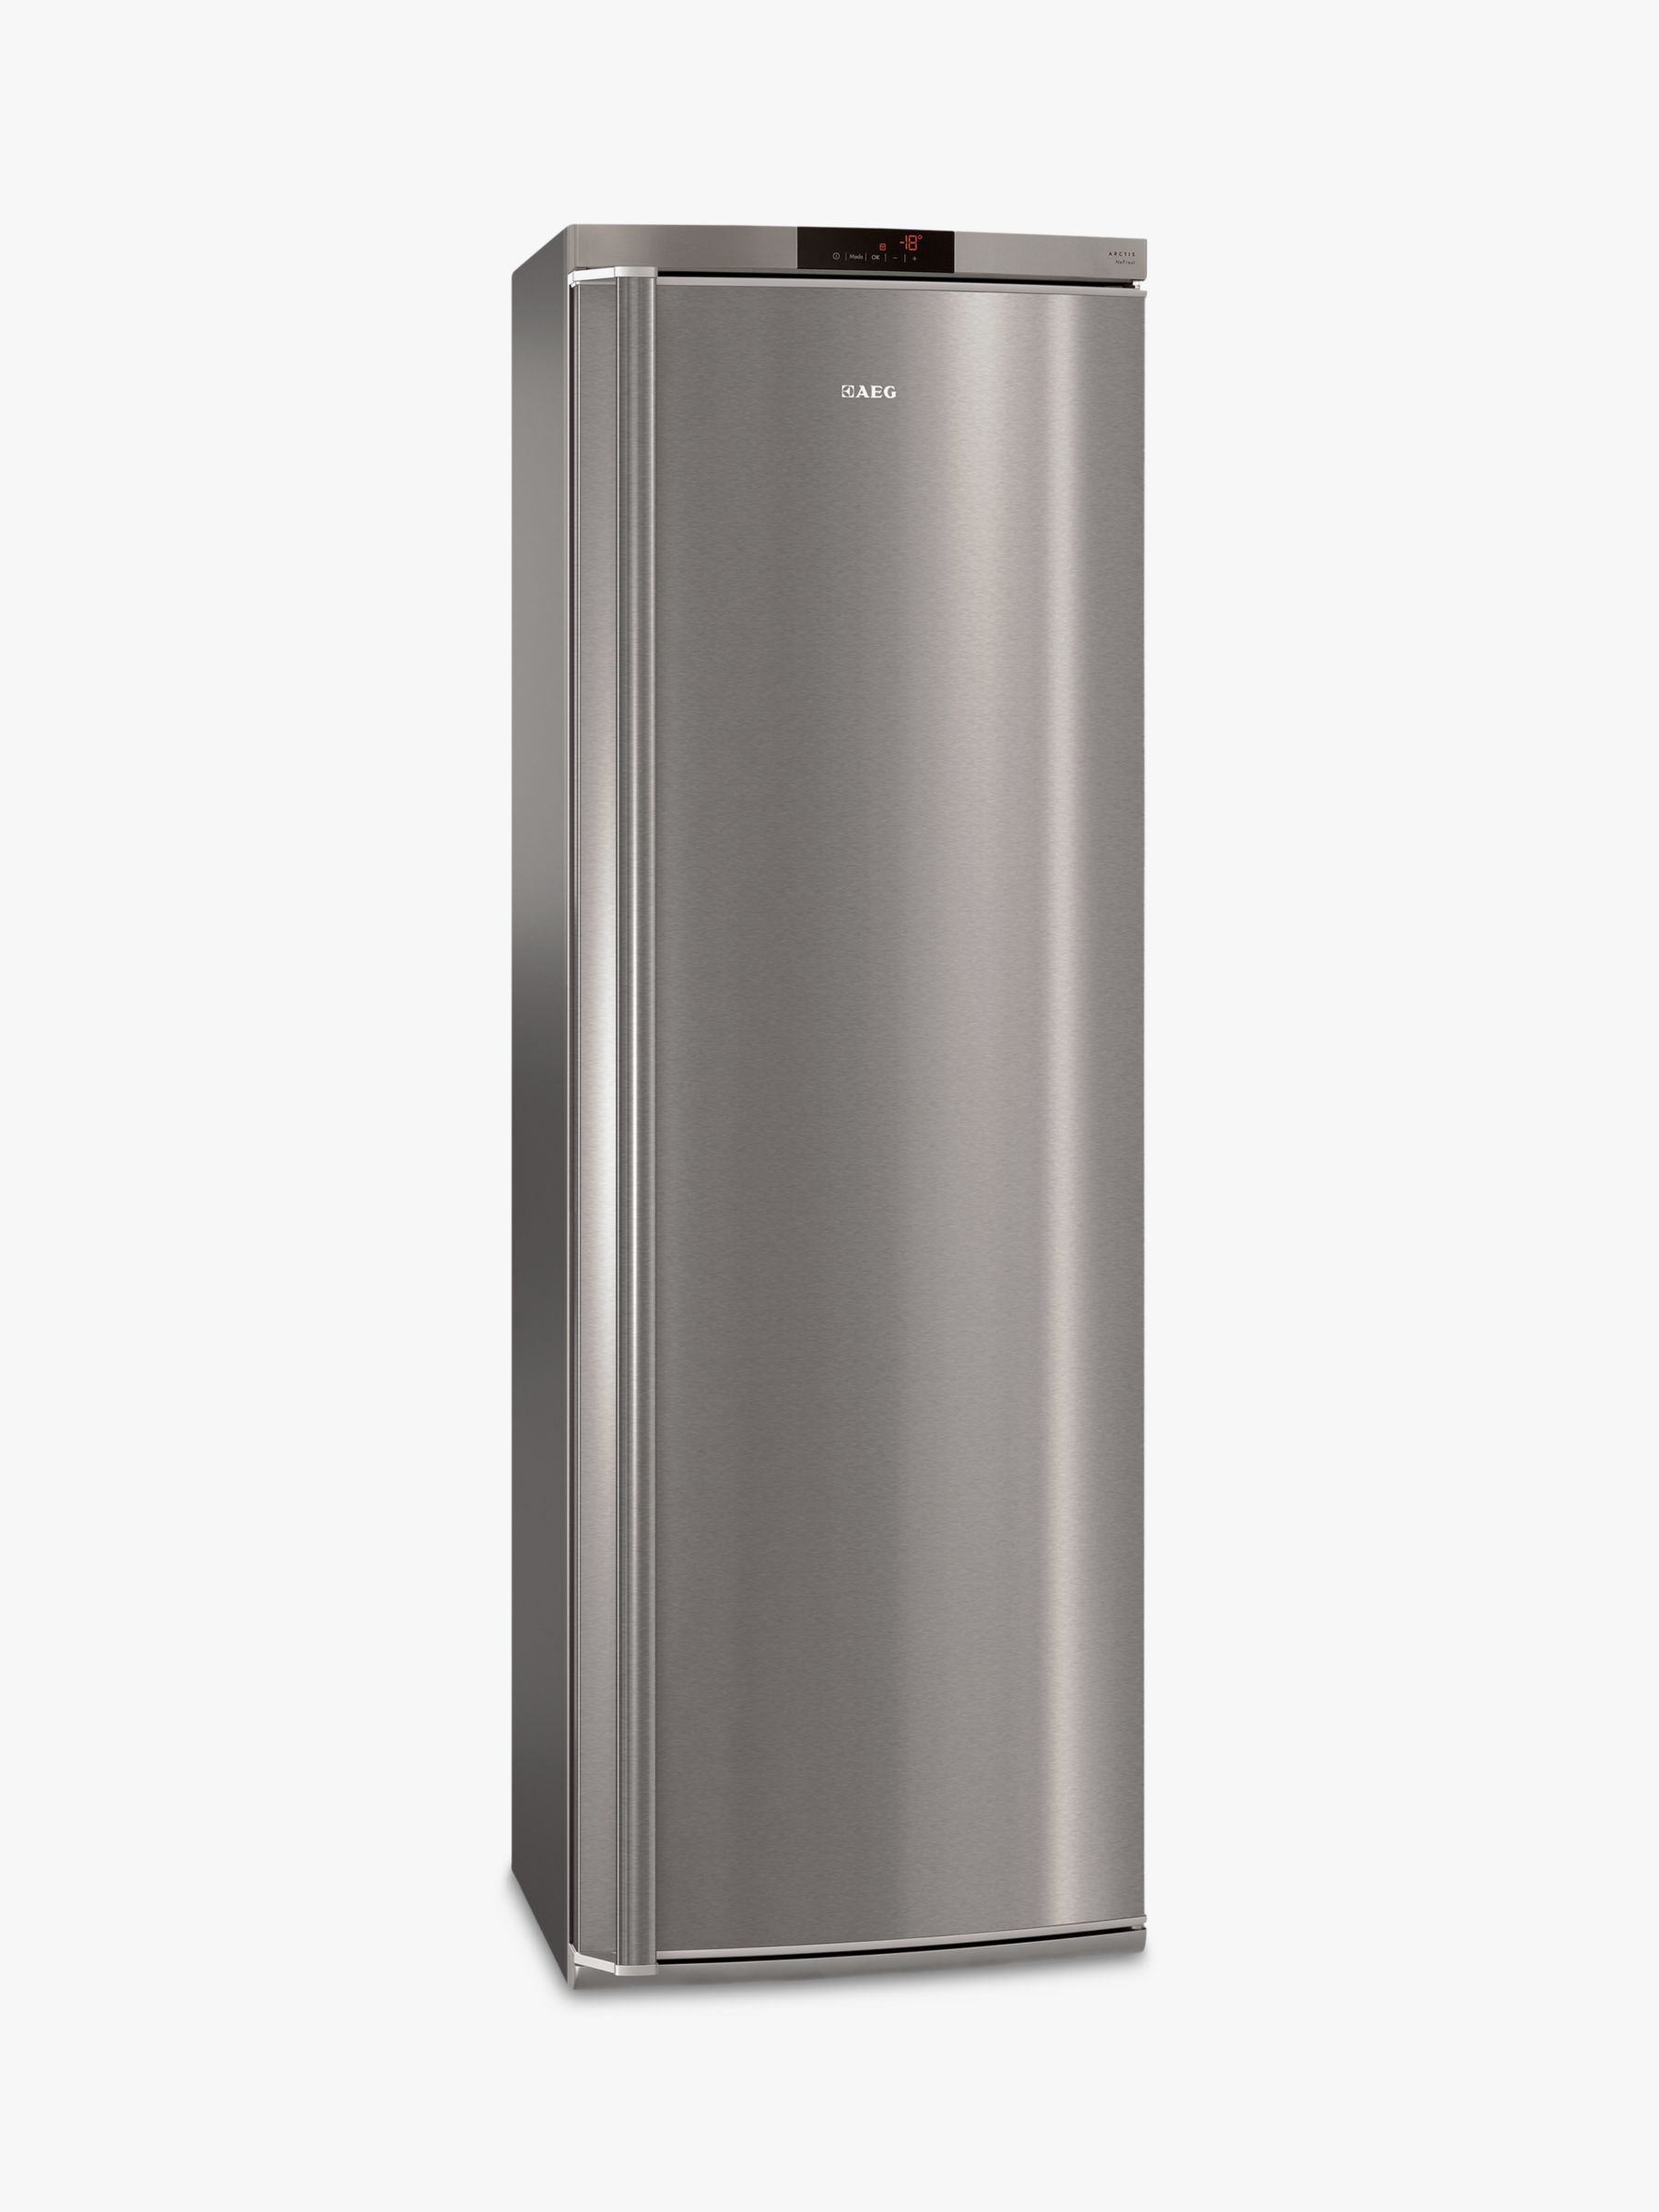 AEG AGE62526NX Tall Freezer, A++ Energy Rating, 60cm Wide, Stainless Steel